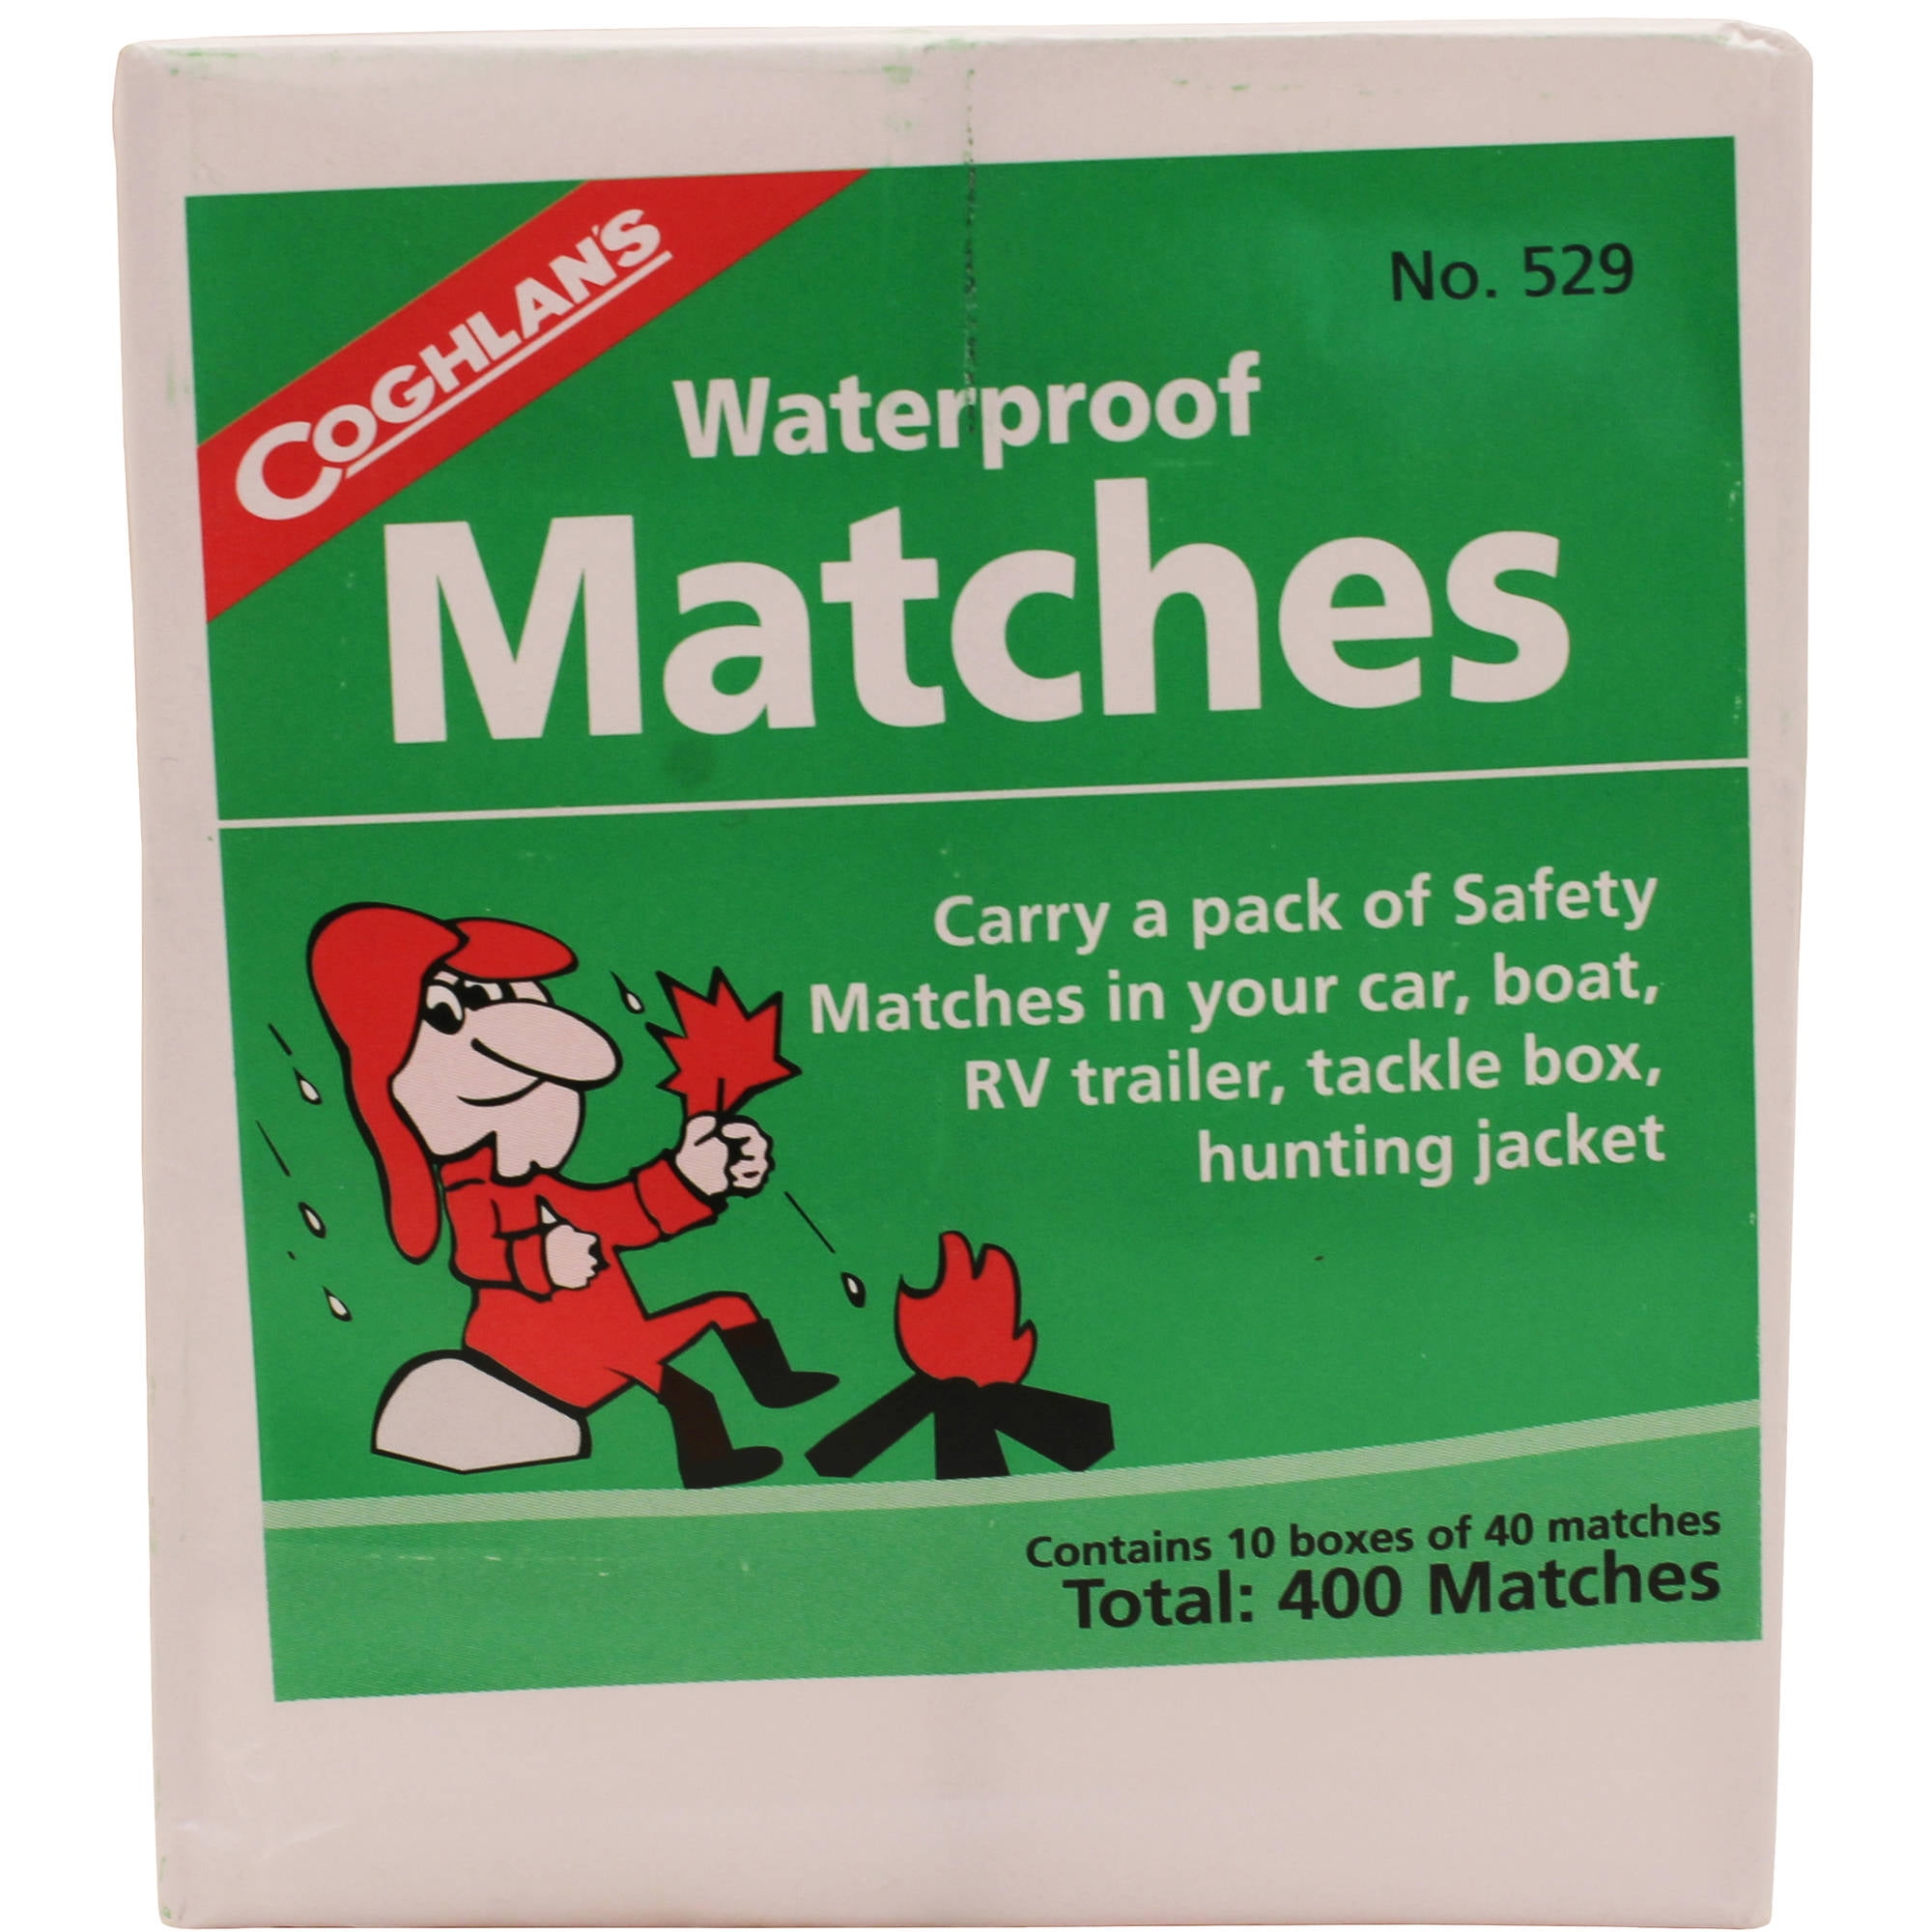 Waterproof Matches - Make Your Own Or Buy Them?